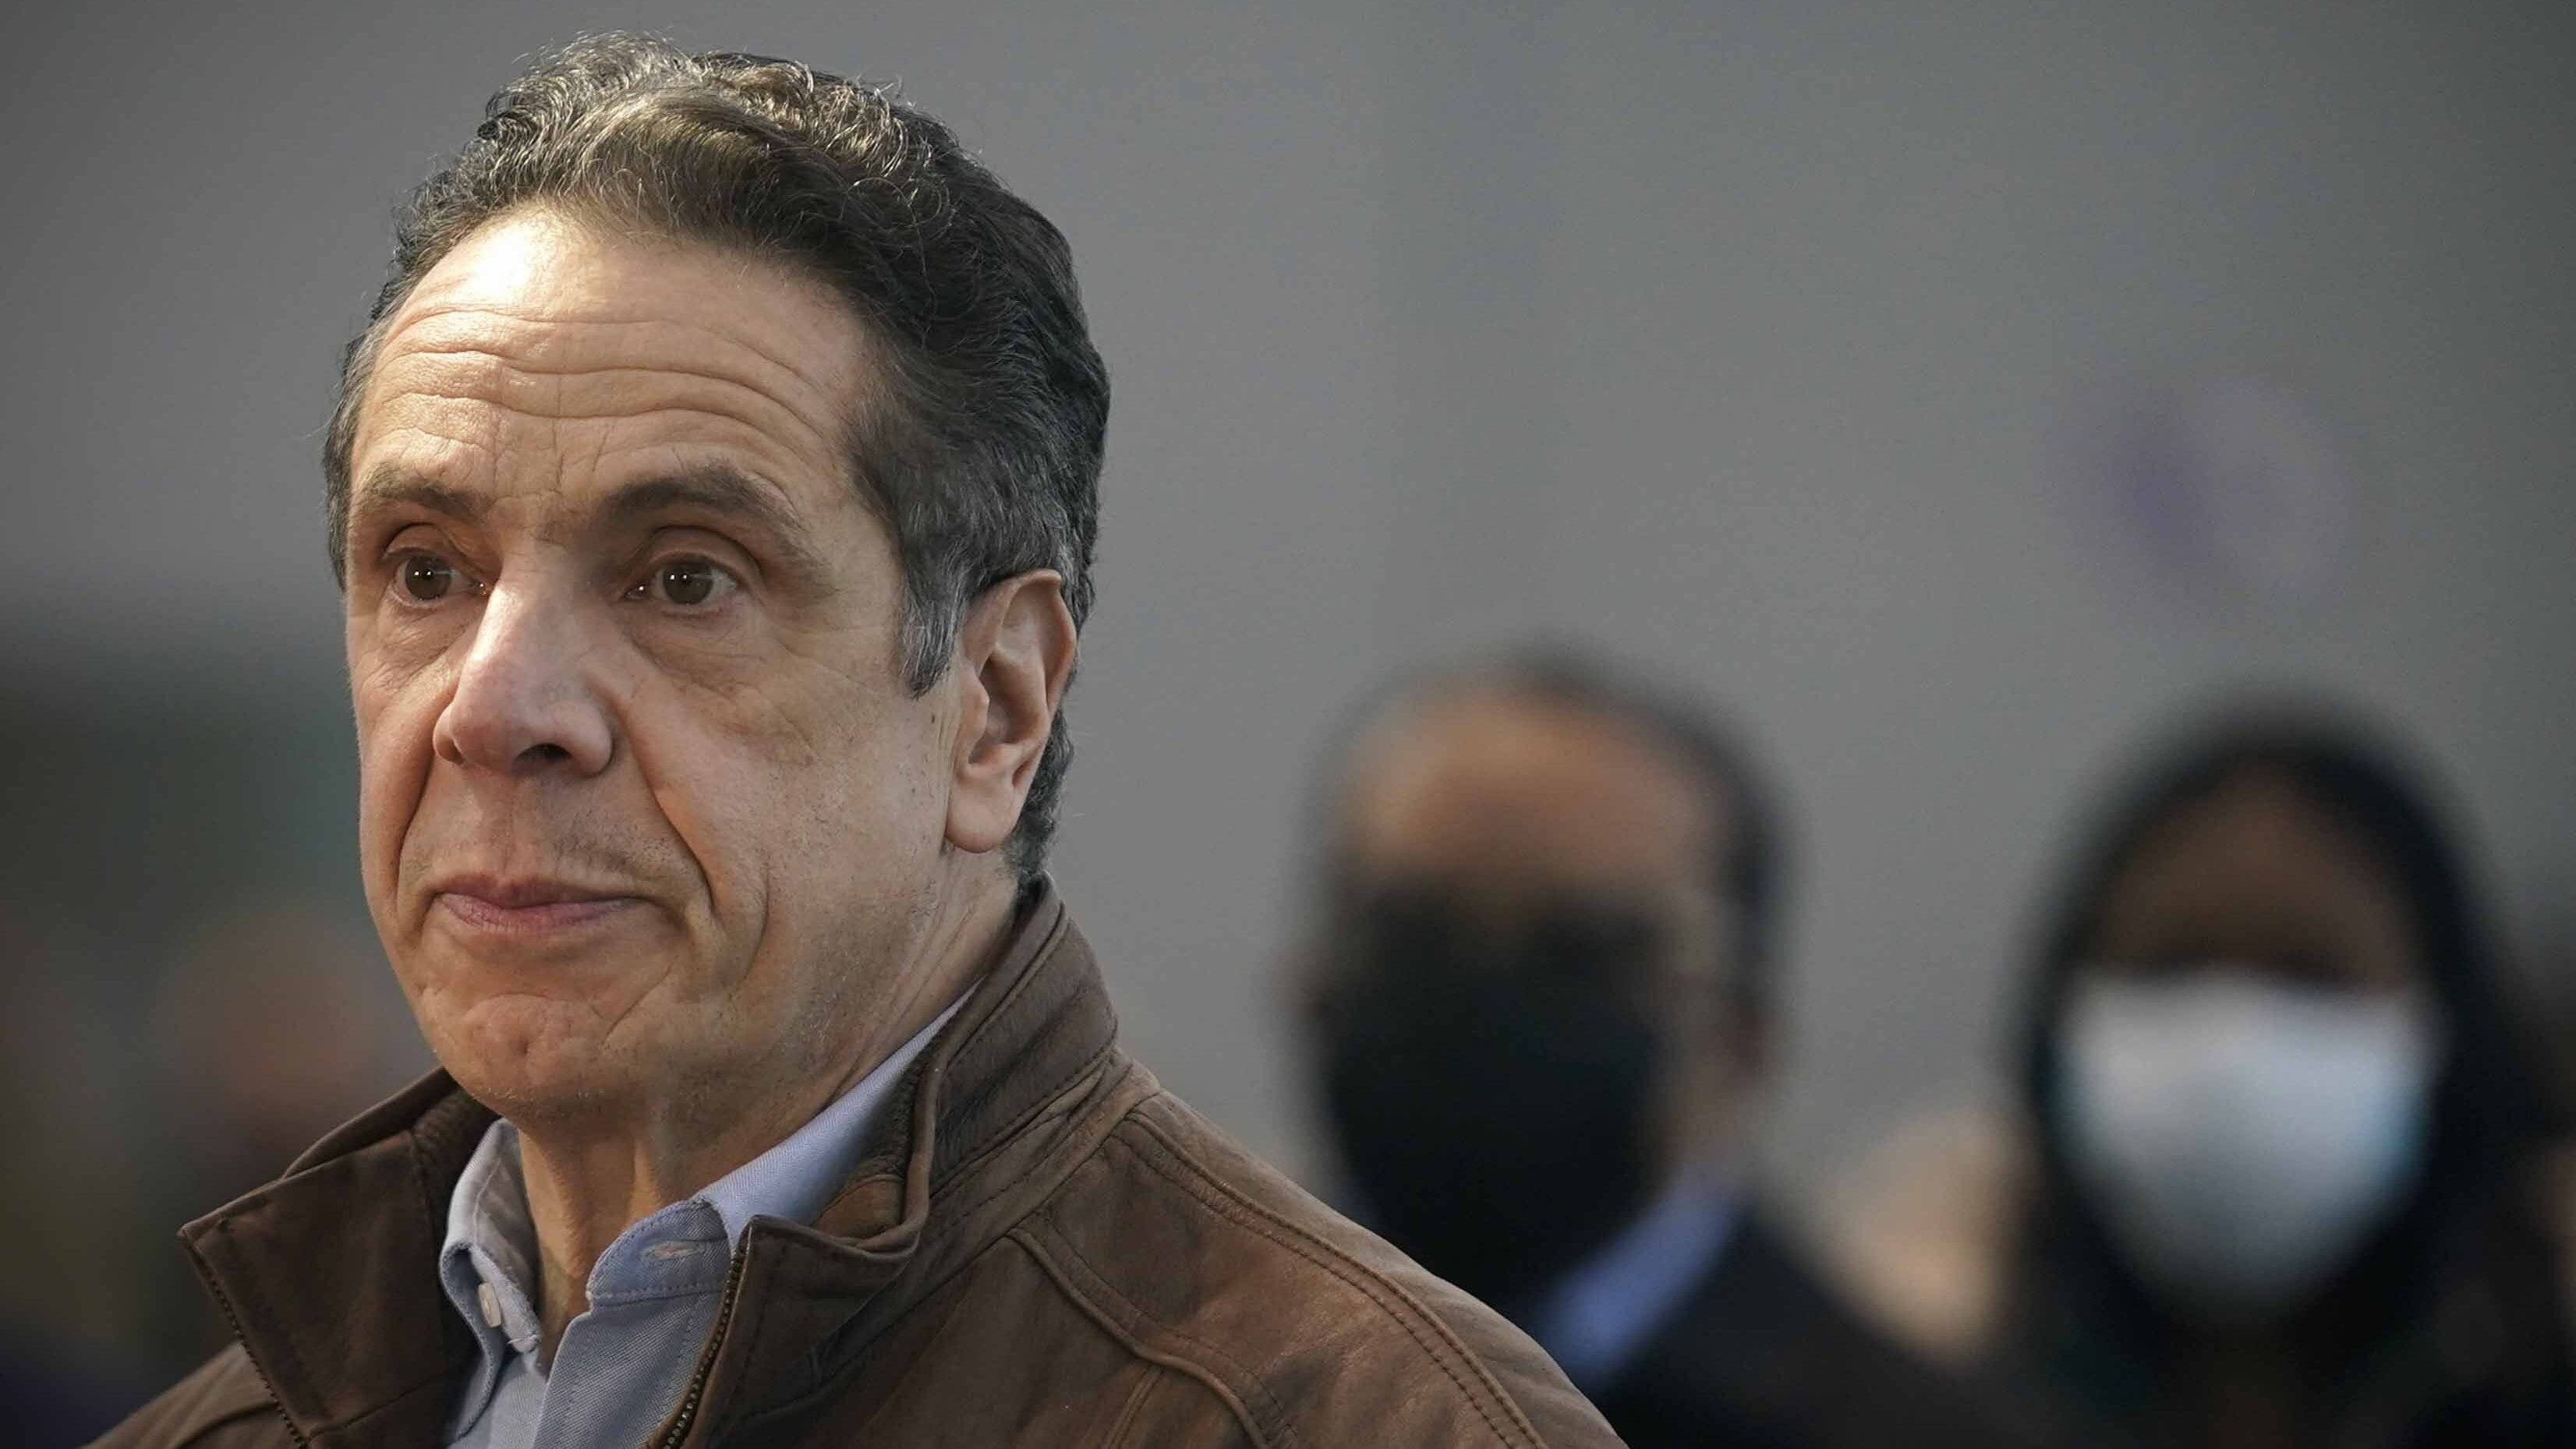 New York lawmakers circulate letter to demand Cuomo's resignation, assemblyman says